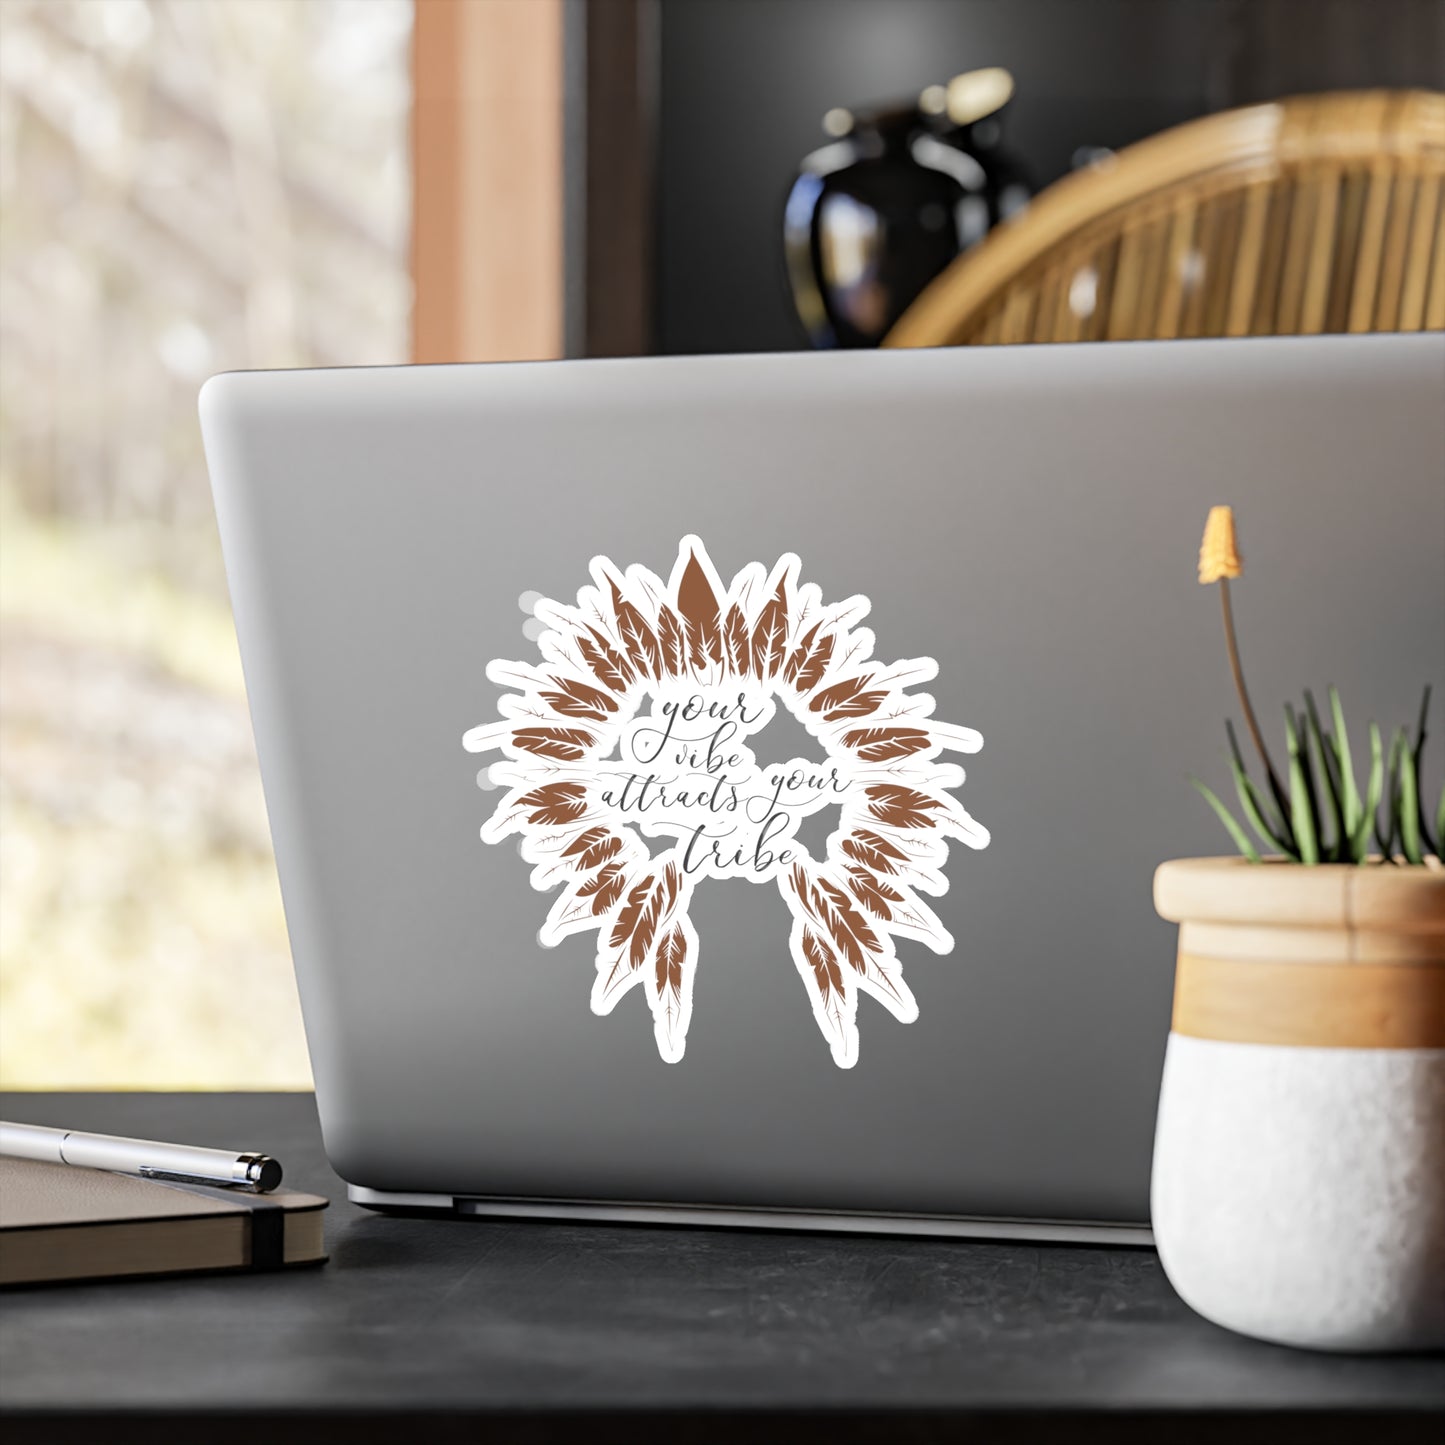 Your Vibe Attracts Your Tribe Sticker - Motivational Treats